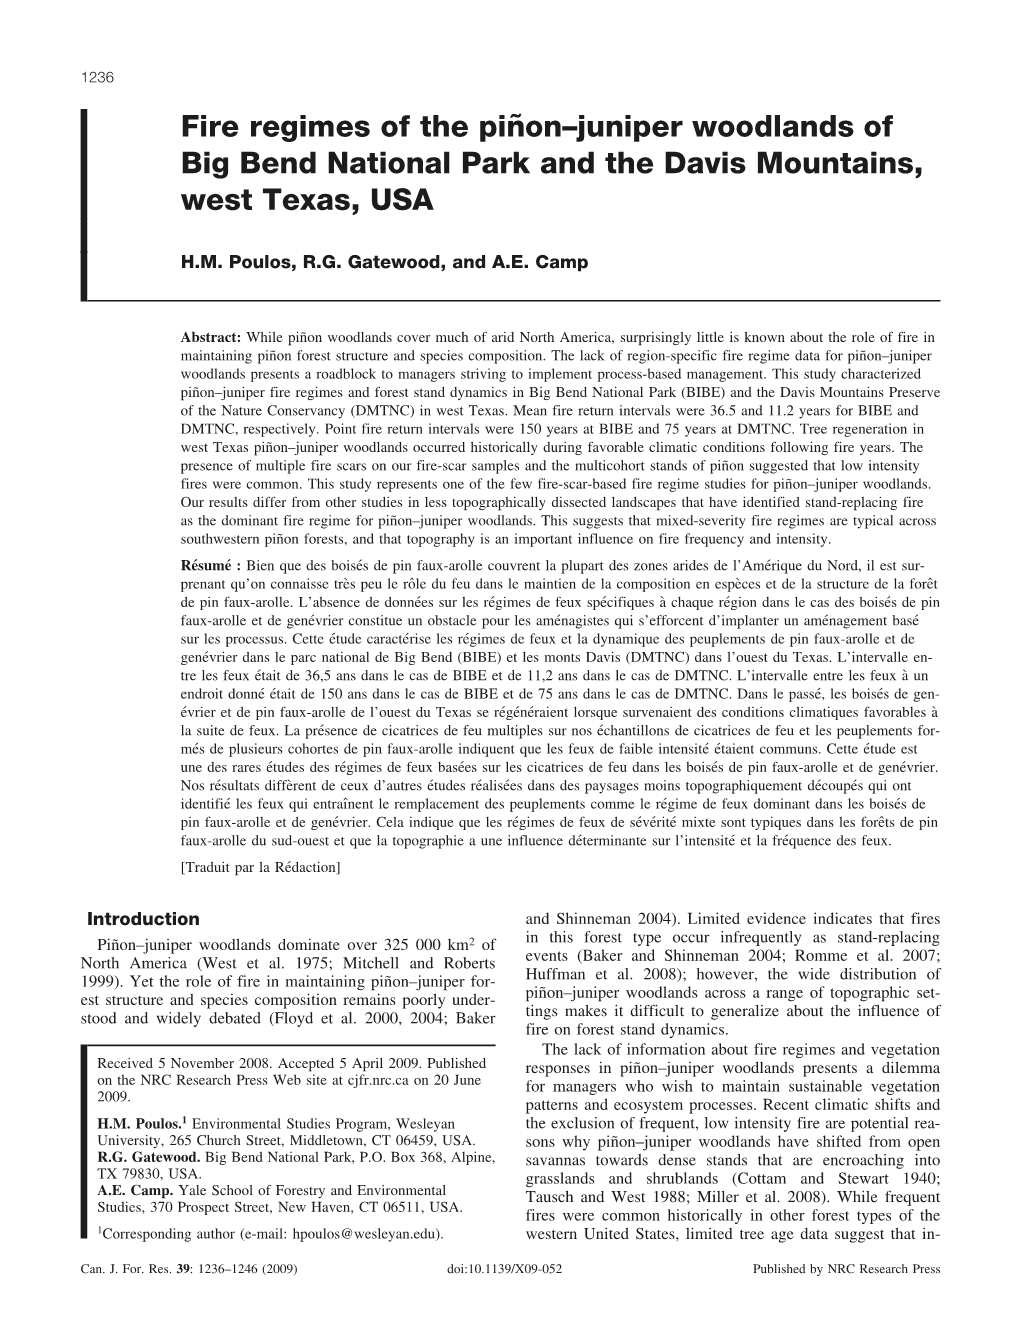 Fire Regimes of the Pin˜ On–Juniper Woodlands of Big Bend National Park and the Davis Mountains, West Texas, USA